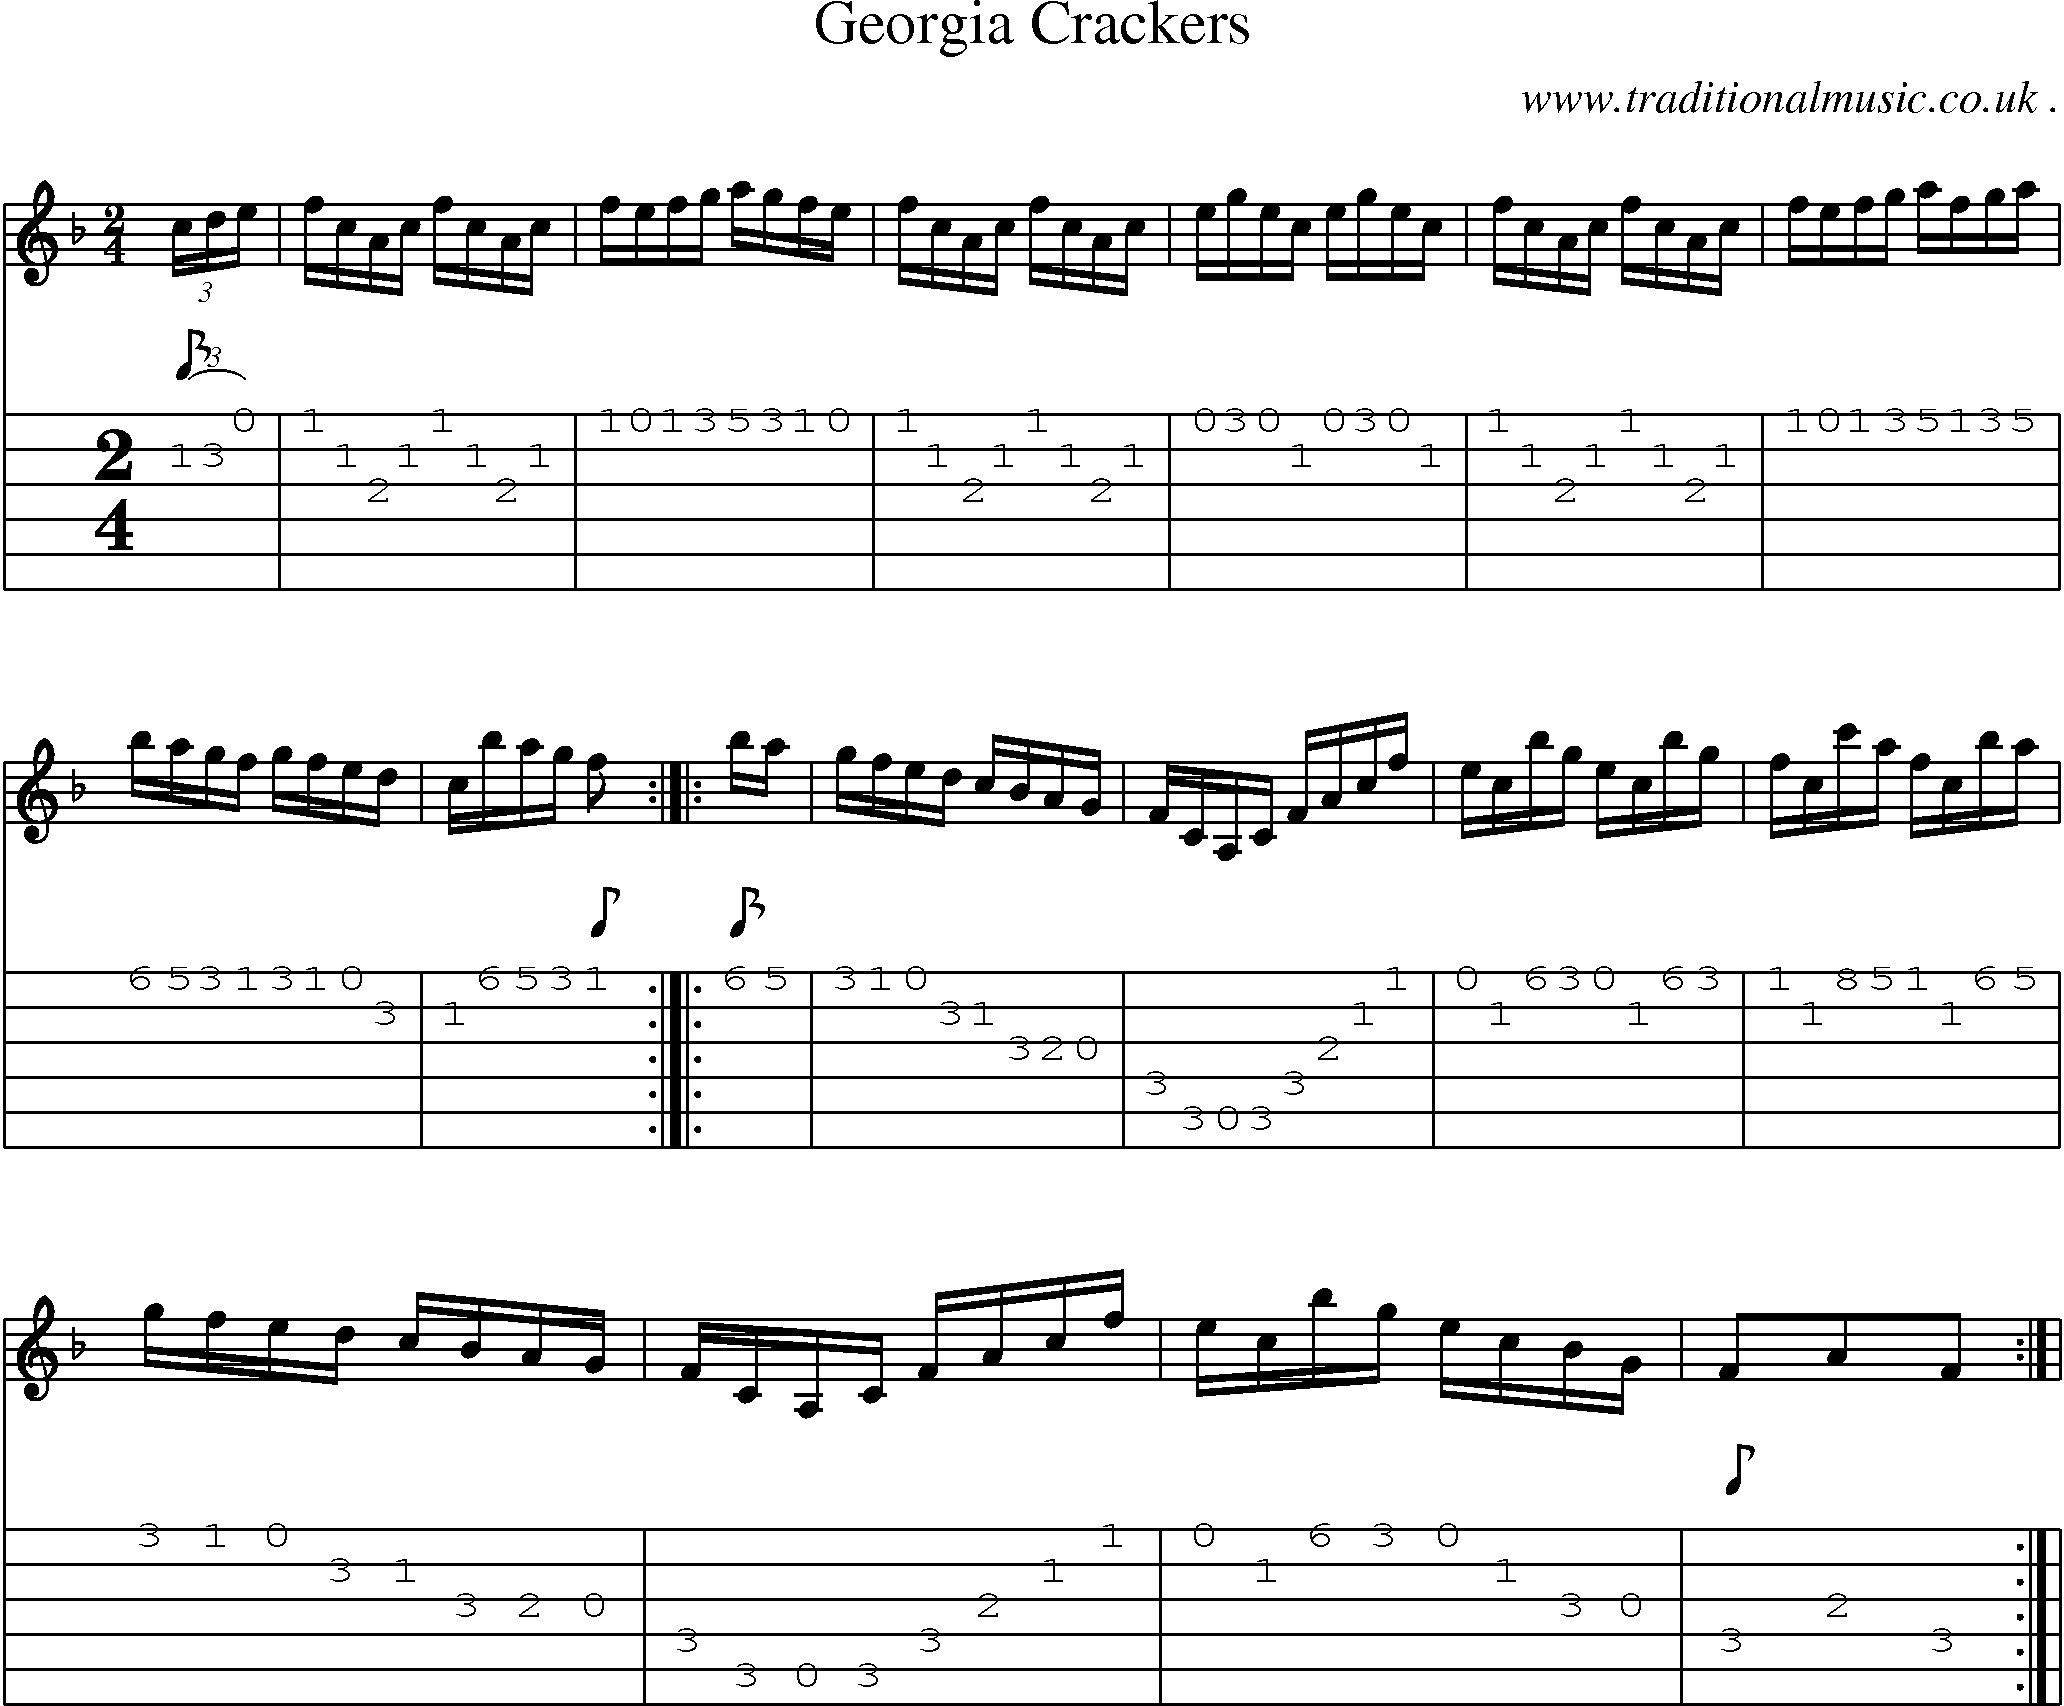 Music Score and Guitar Tabs for Georgia Crackers